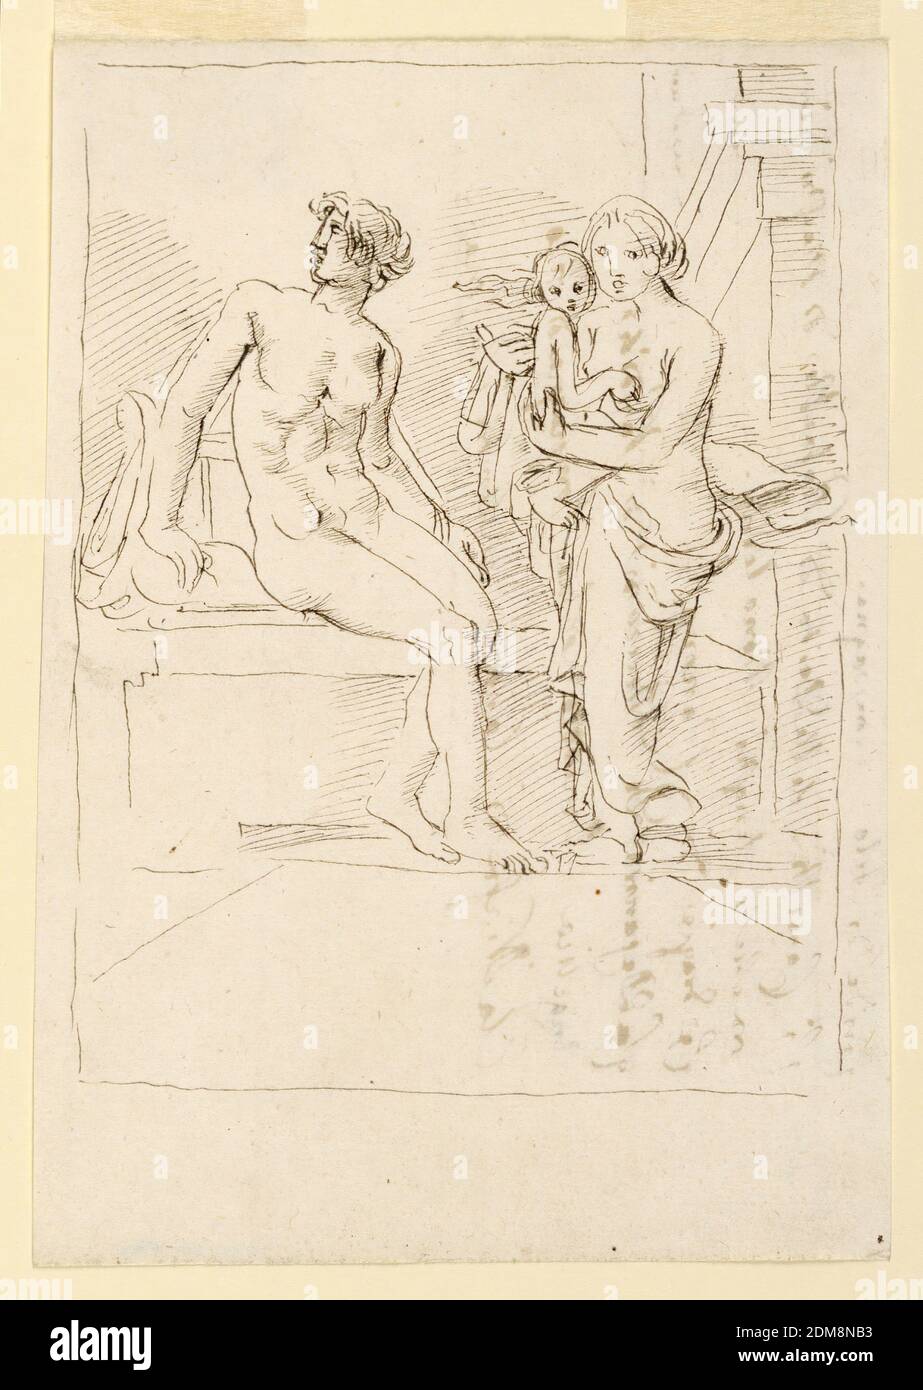 Sketch, Classical Man, Woman, and Child, Fortunato Duranti, Italian, 1787 - 1863, Pen and ink on paper, Sketch, Classical Man, Woman, and Child., Rome, Italy, 1820–1850, Drawing Stock Photo